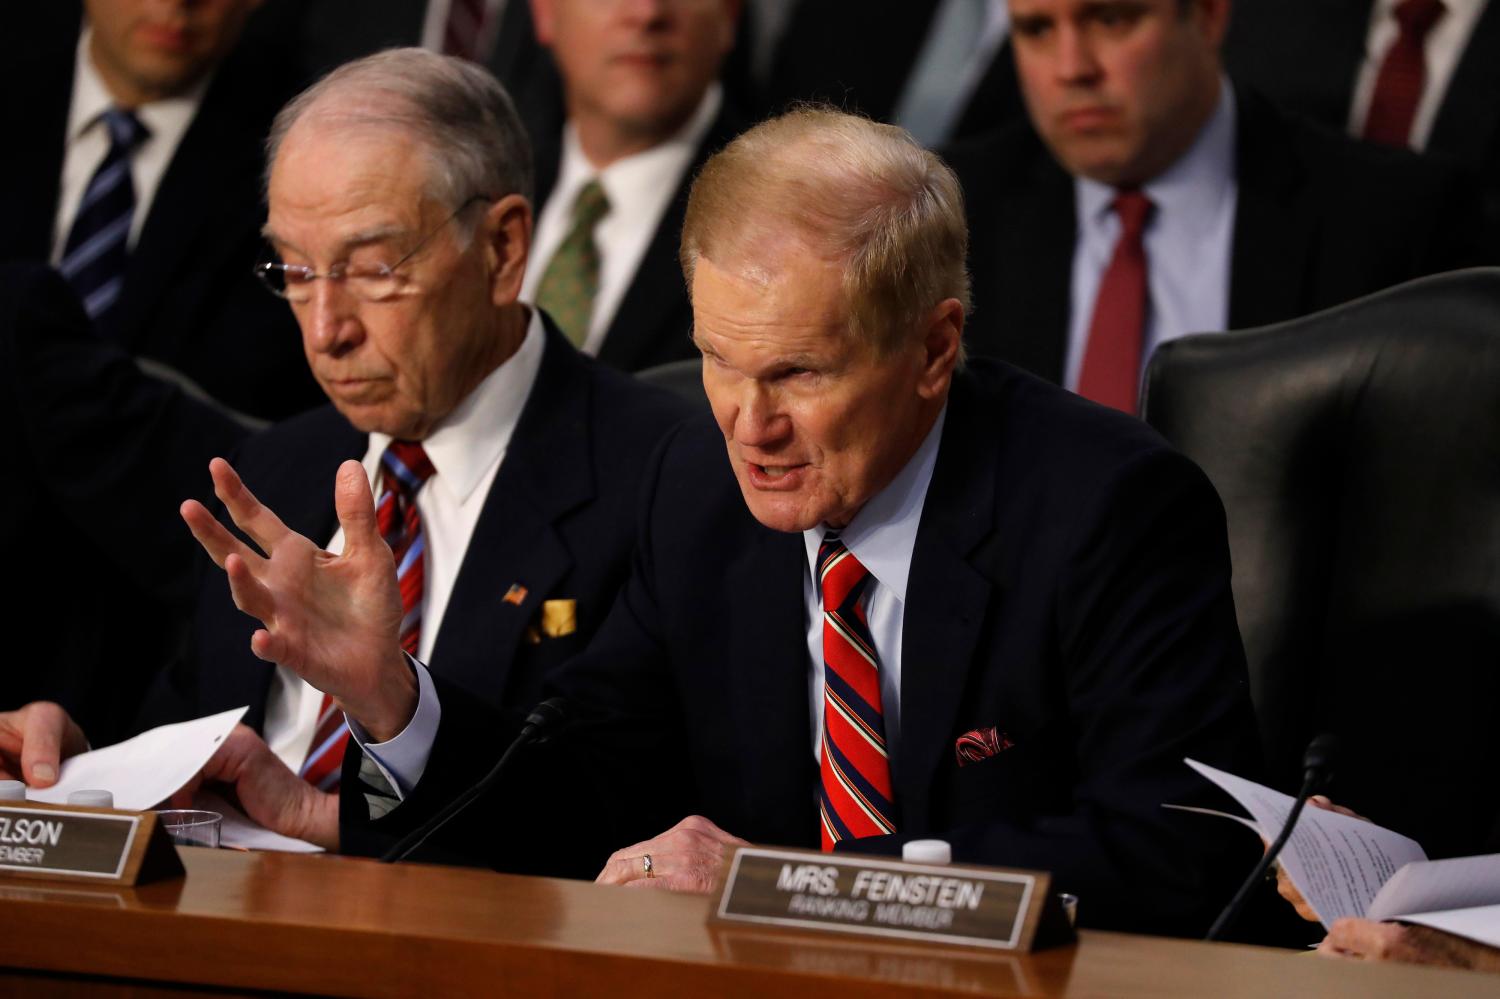 Sen. Bill Nelson (D-FL) questions Facebook CEO Mark Zuckerberg as Zuckerberg (not pictured) testifies before a joint Judiciary and Commerce Committee hearing on Capitol Hill in Washington, U.S., April 10, 2018. REUTERS/Aaron P. Bernstein - HP1EE4A1HXS64